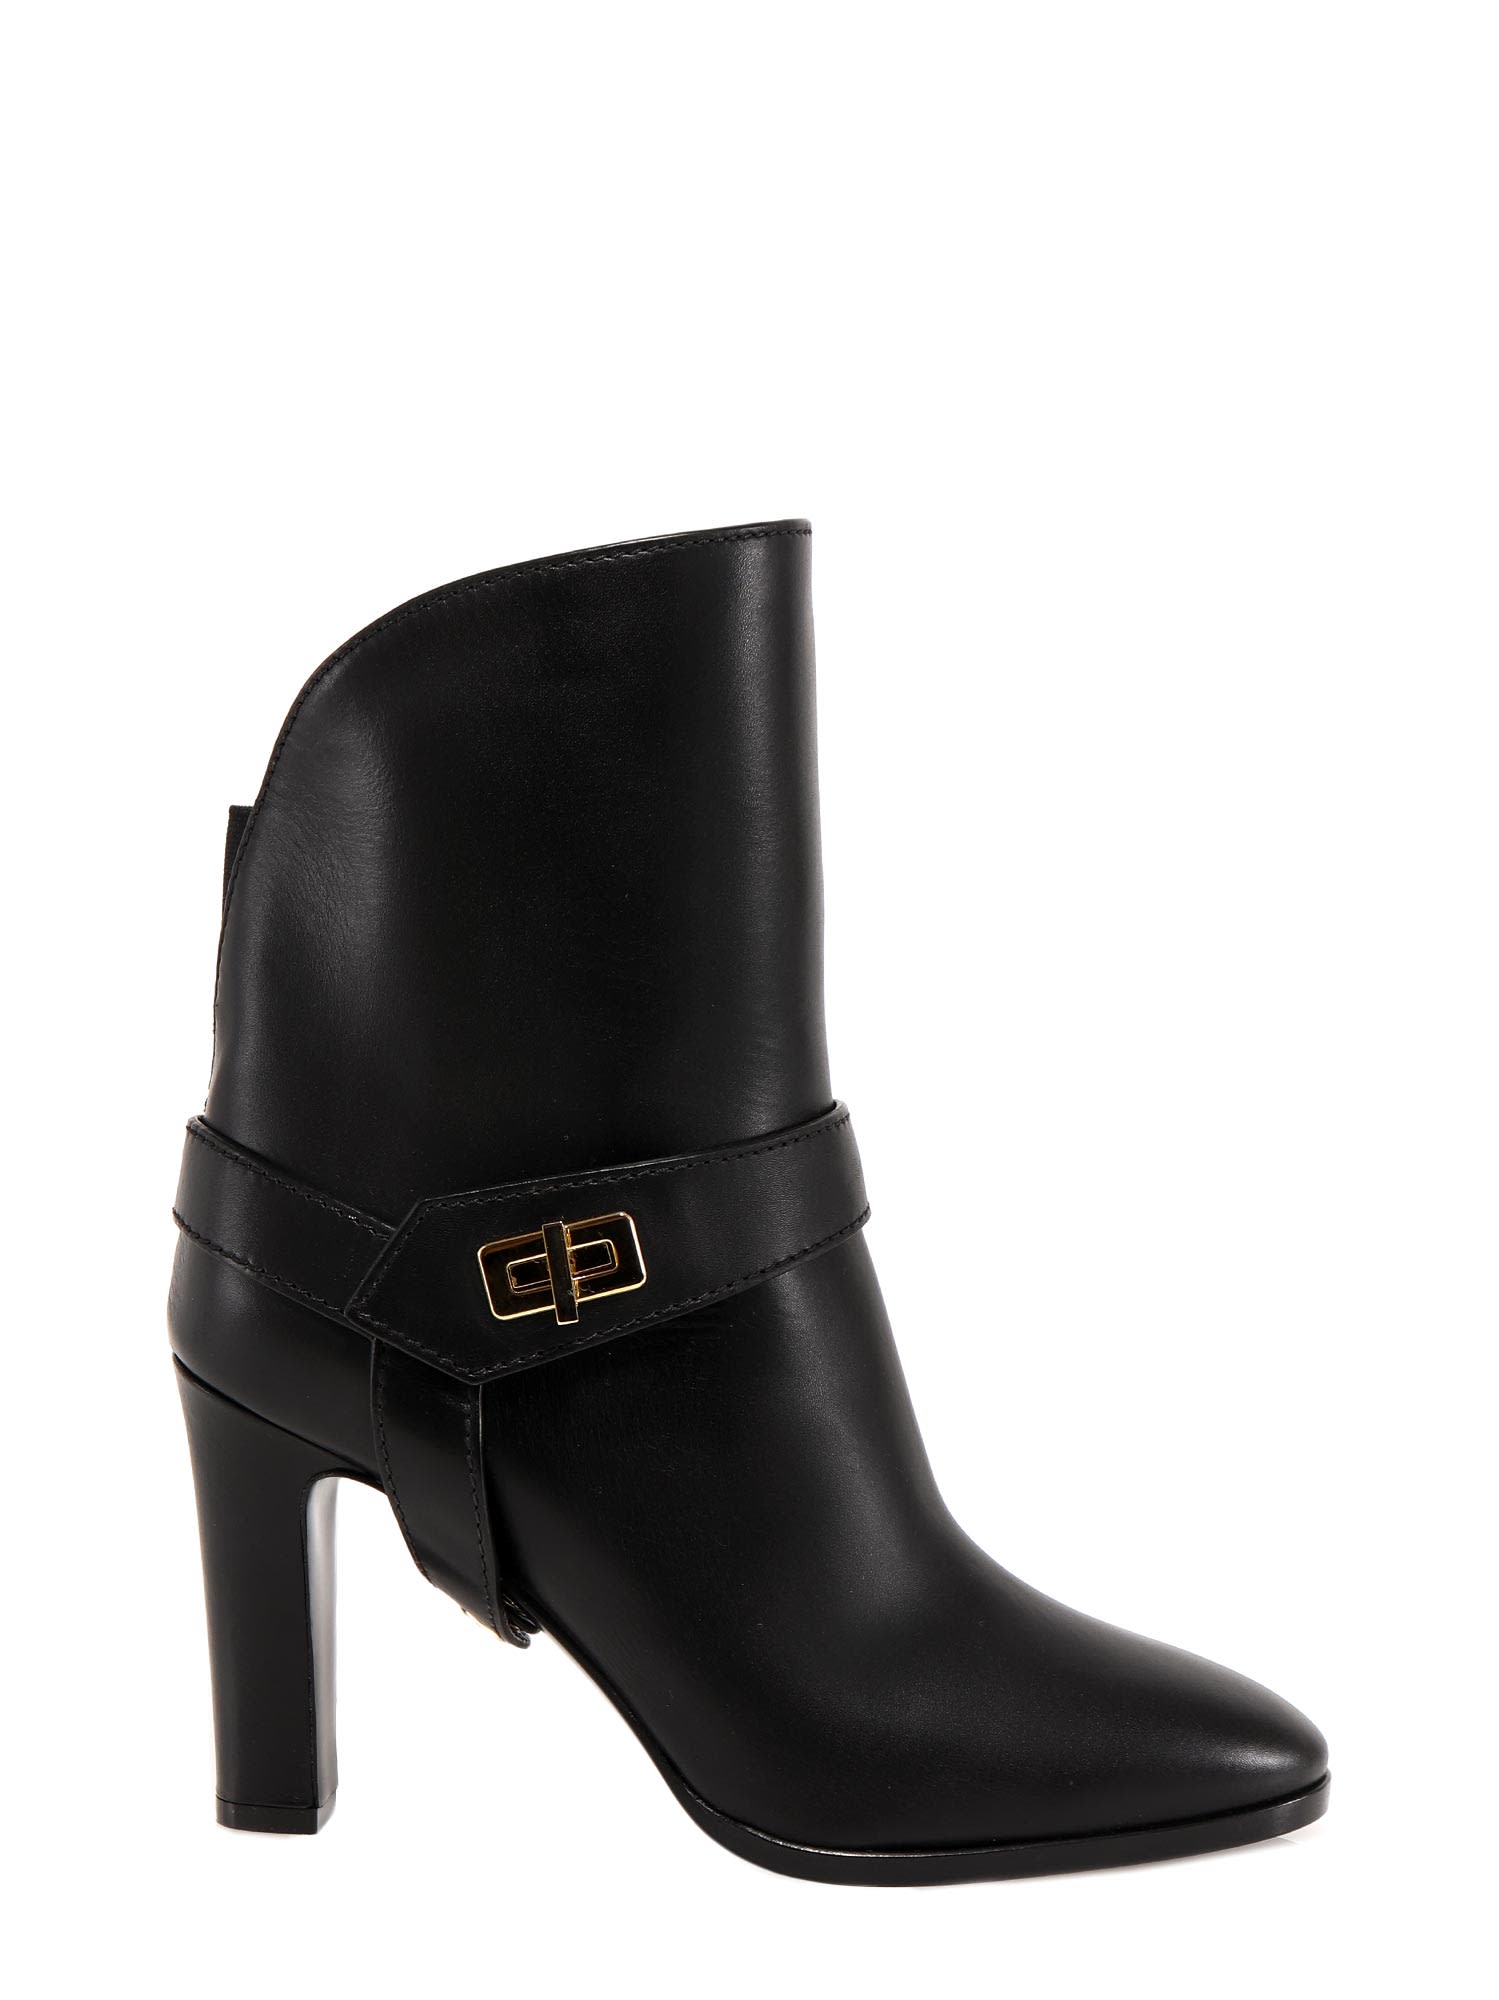 Buy Givenchy Eden Boots In Smooth Leather online, shop Givenchy shoes with free shipping